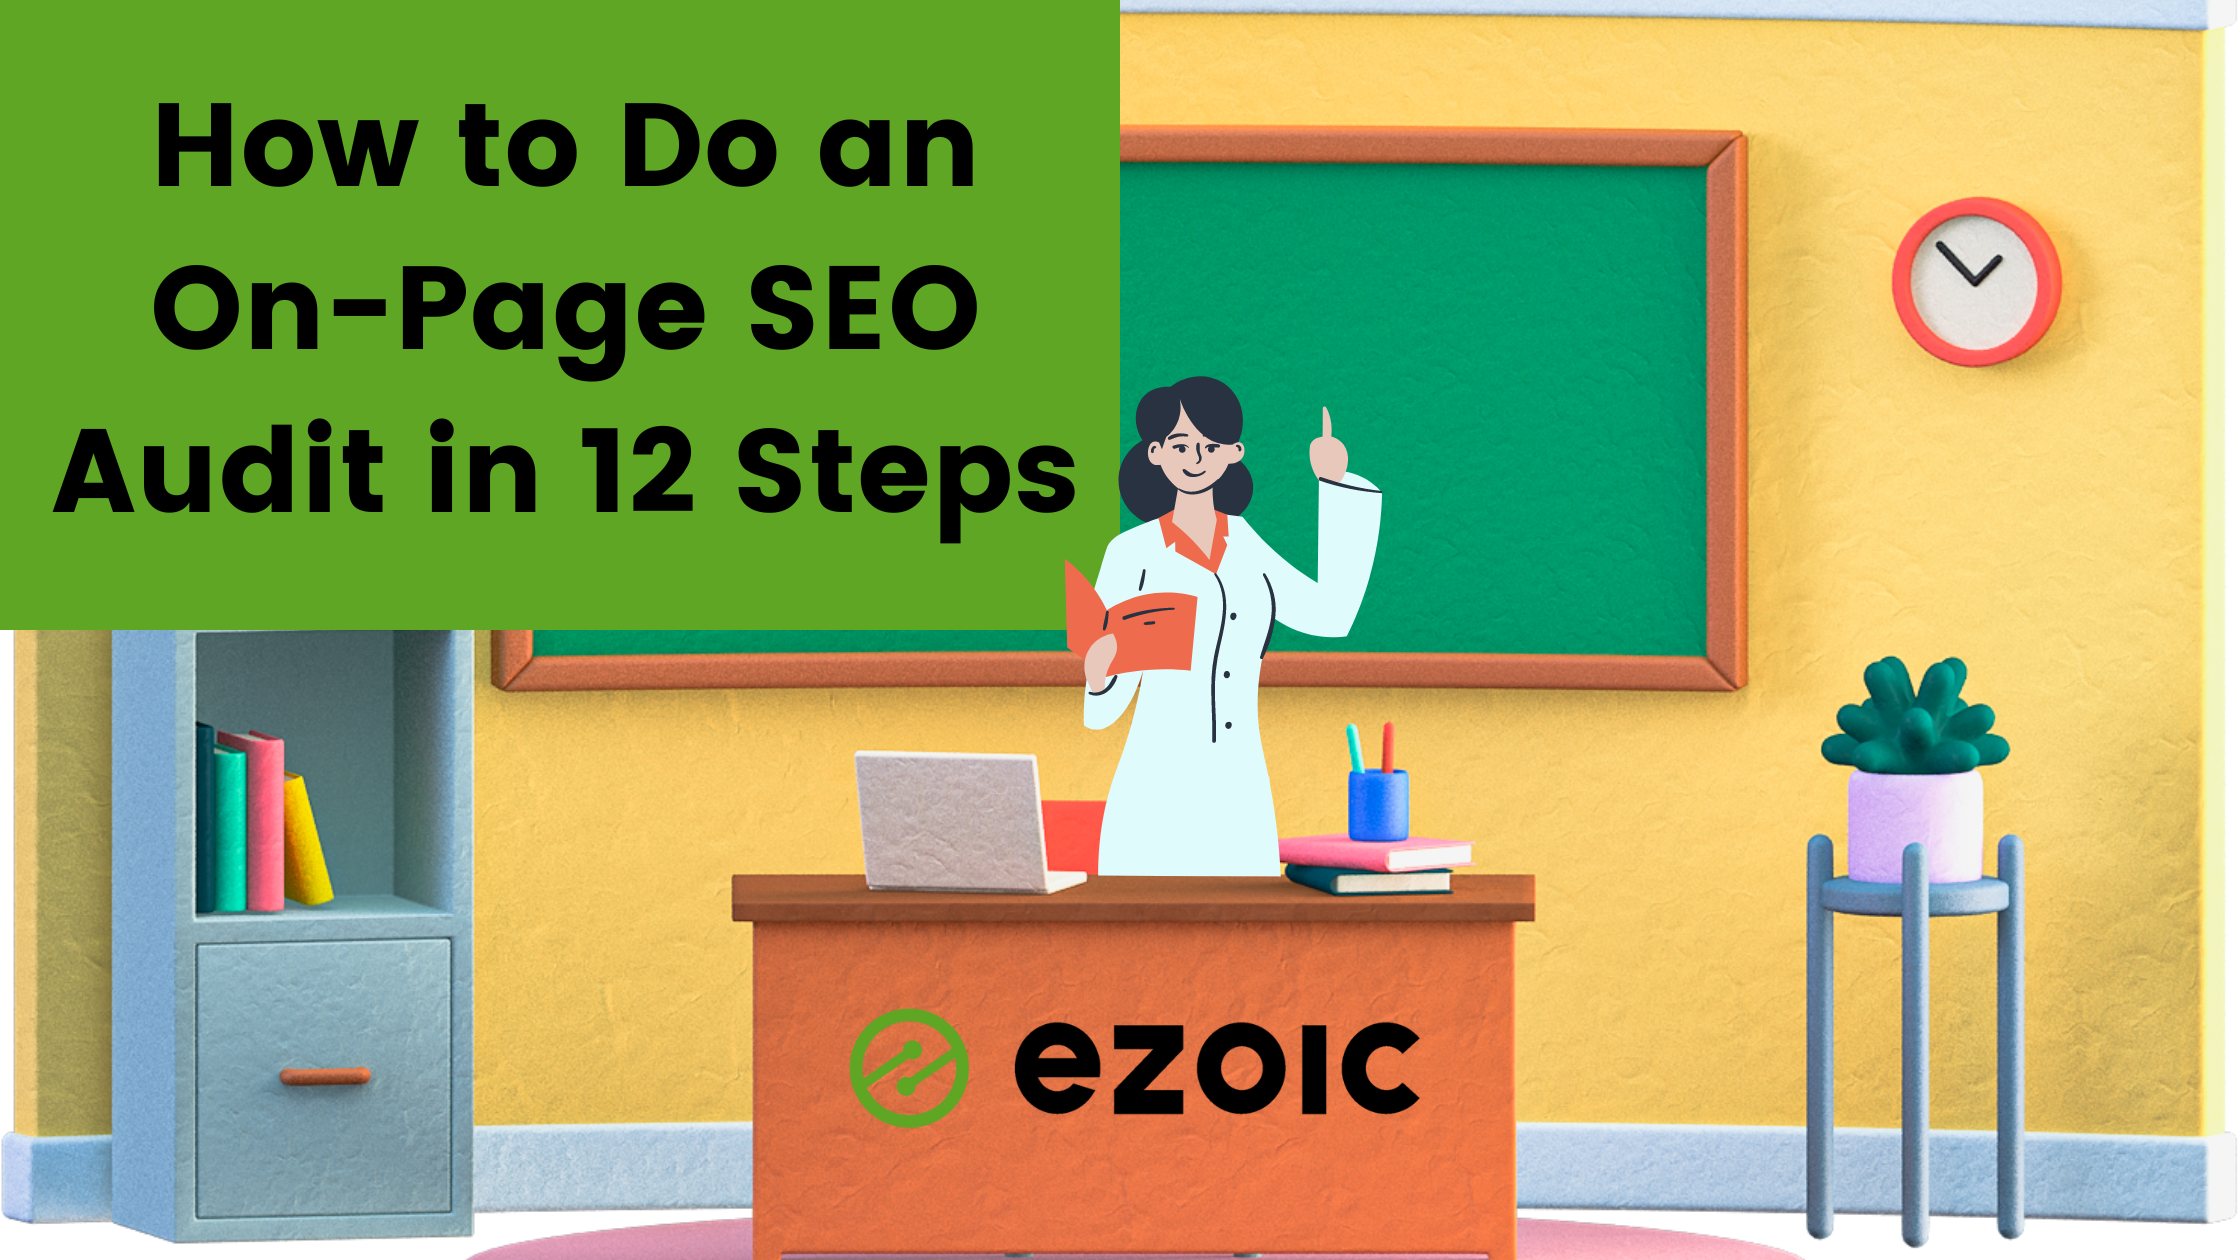 How to Do an On-Page SEO Audit in 12 Steps